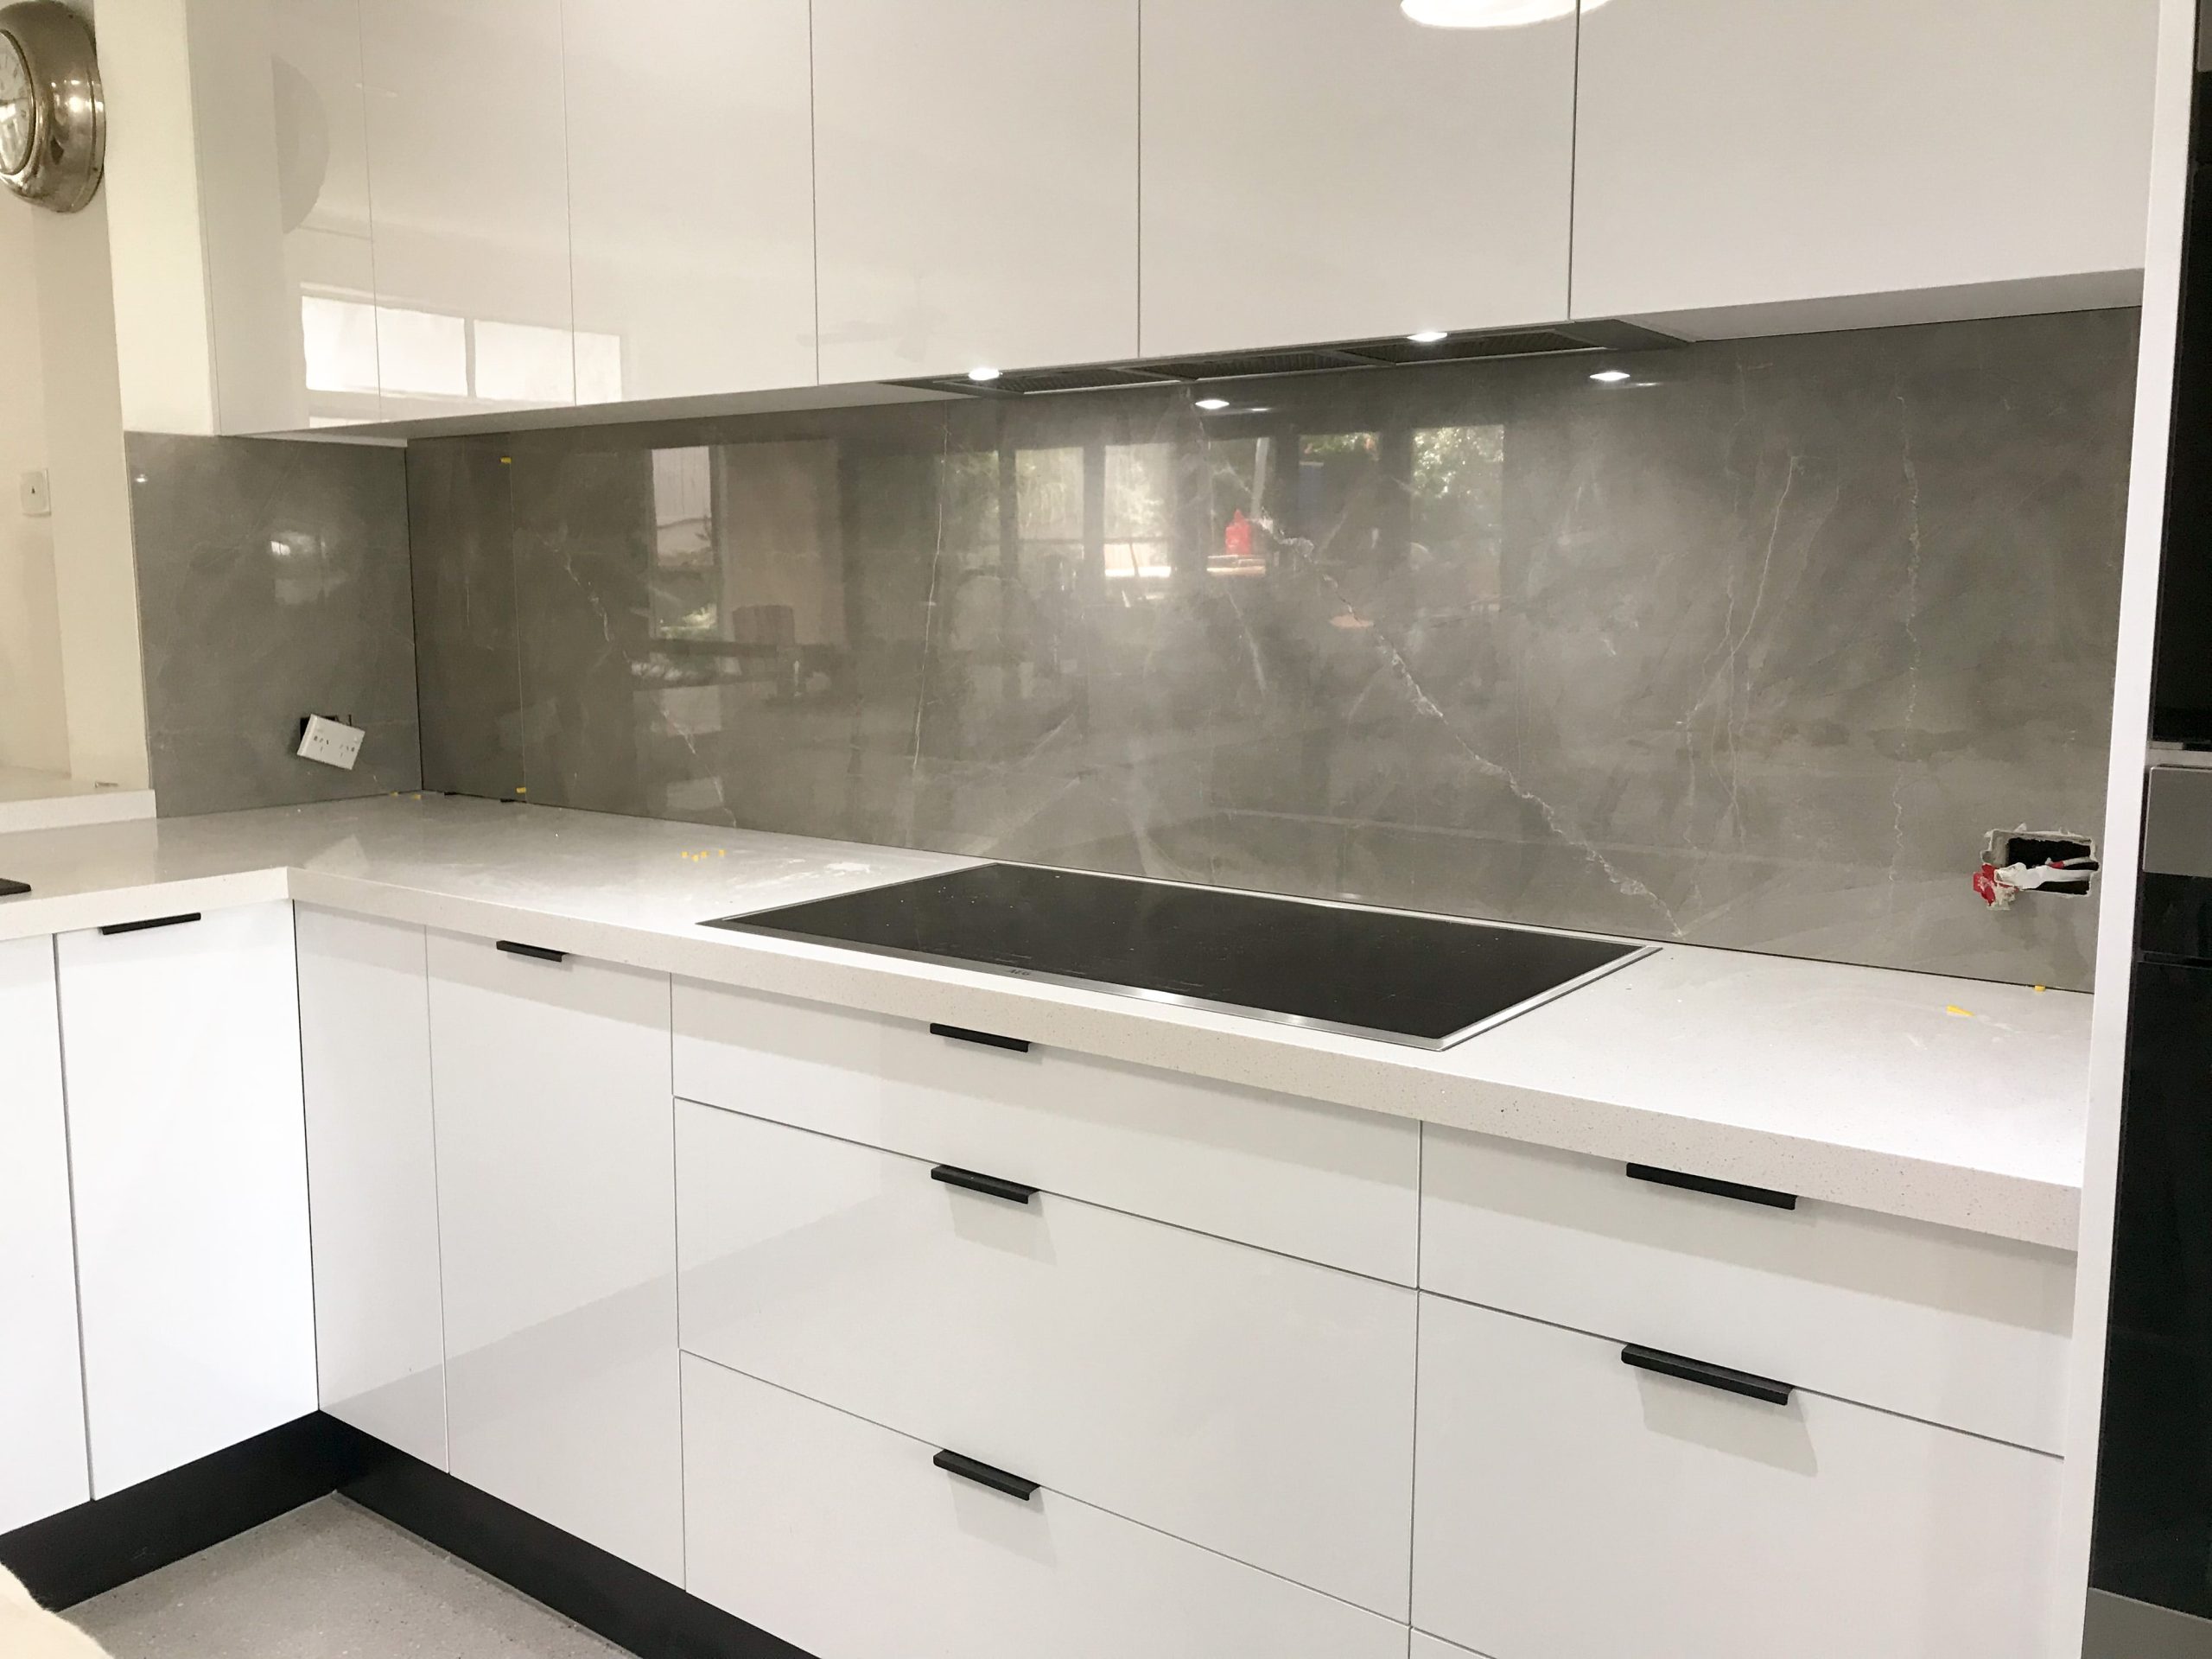 Large Format 2400x800 Kitchen Grey Marble